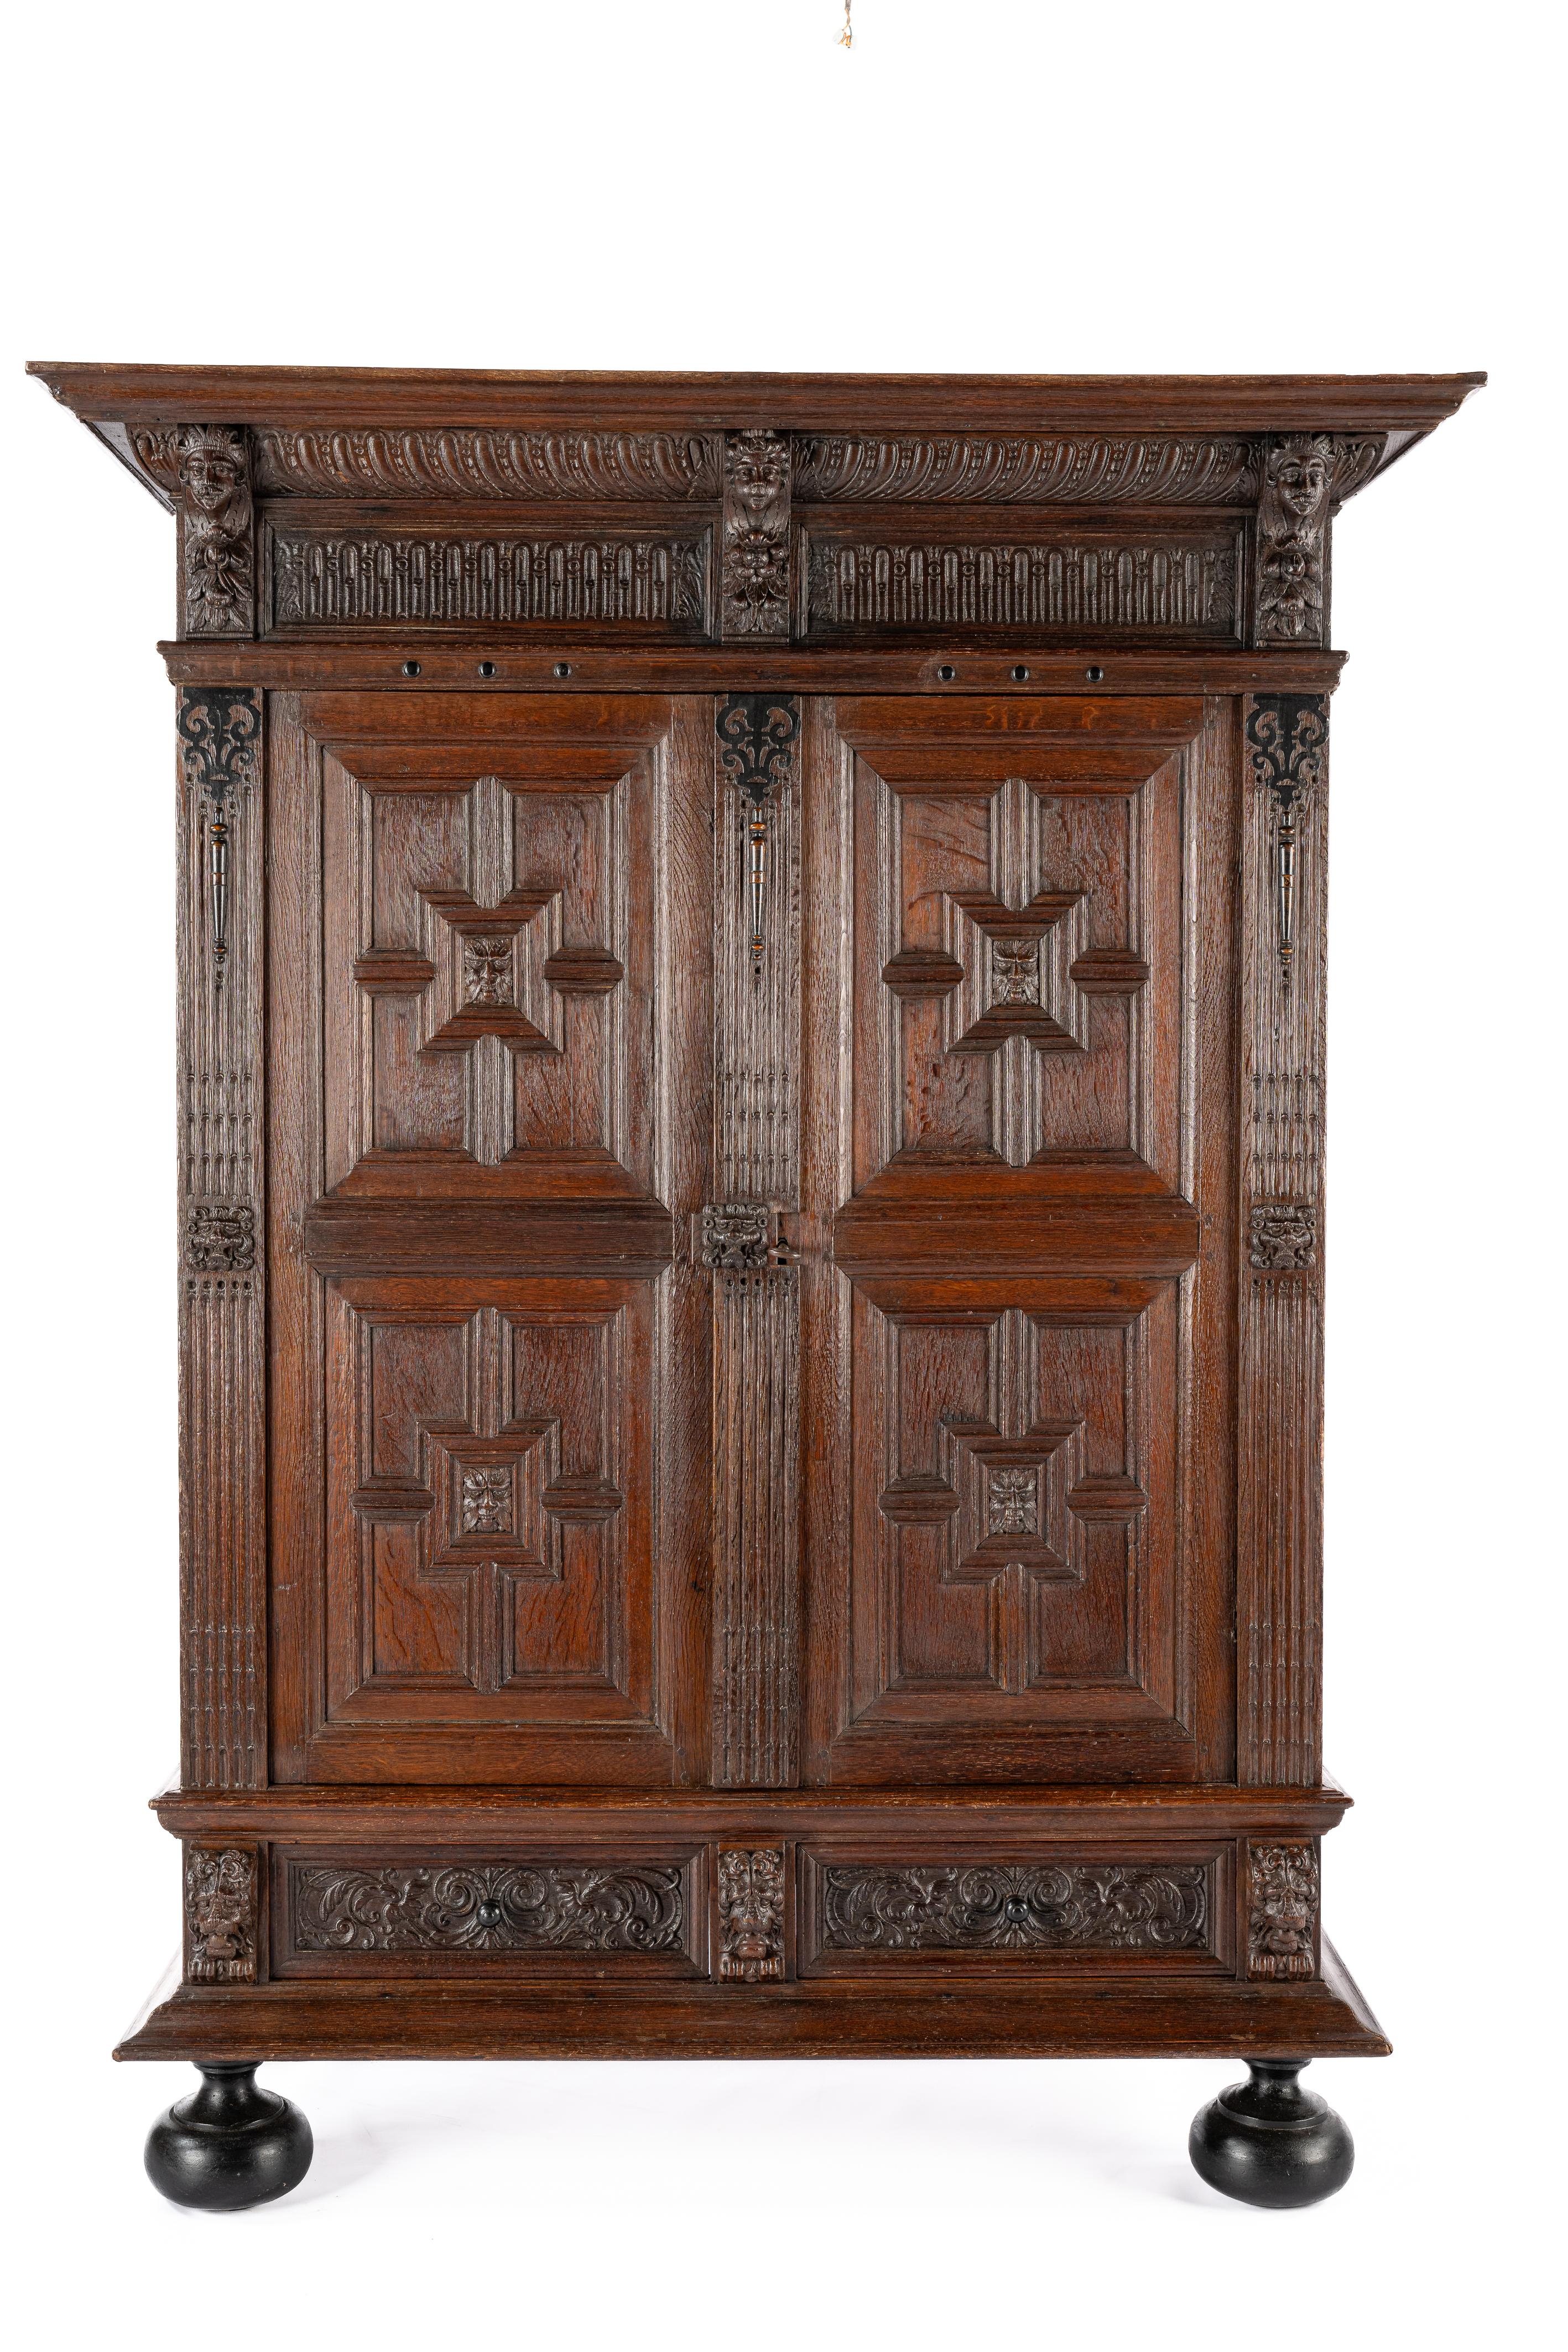 This antique Dutch Renaissance cabinet was crafted in the southern Netherlands at the end of the 18th century, around 1780. It serves as a quintessential example of the furniture craftsmanship during the Dutch Golden Age. Constructed from the finest